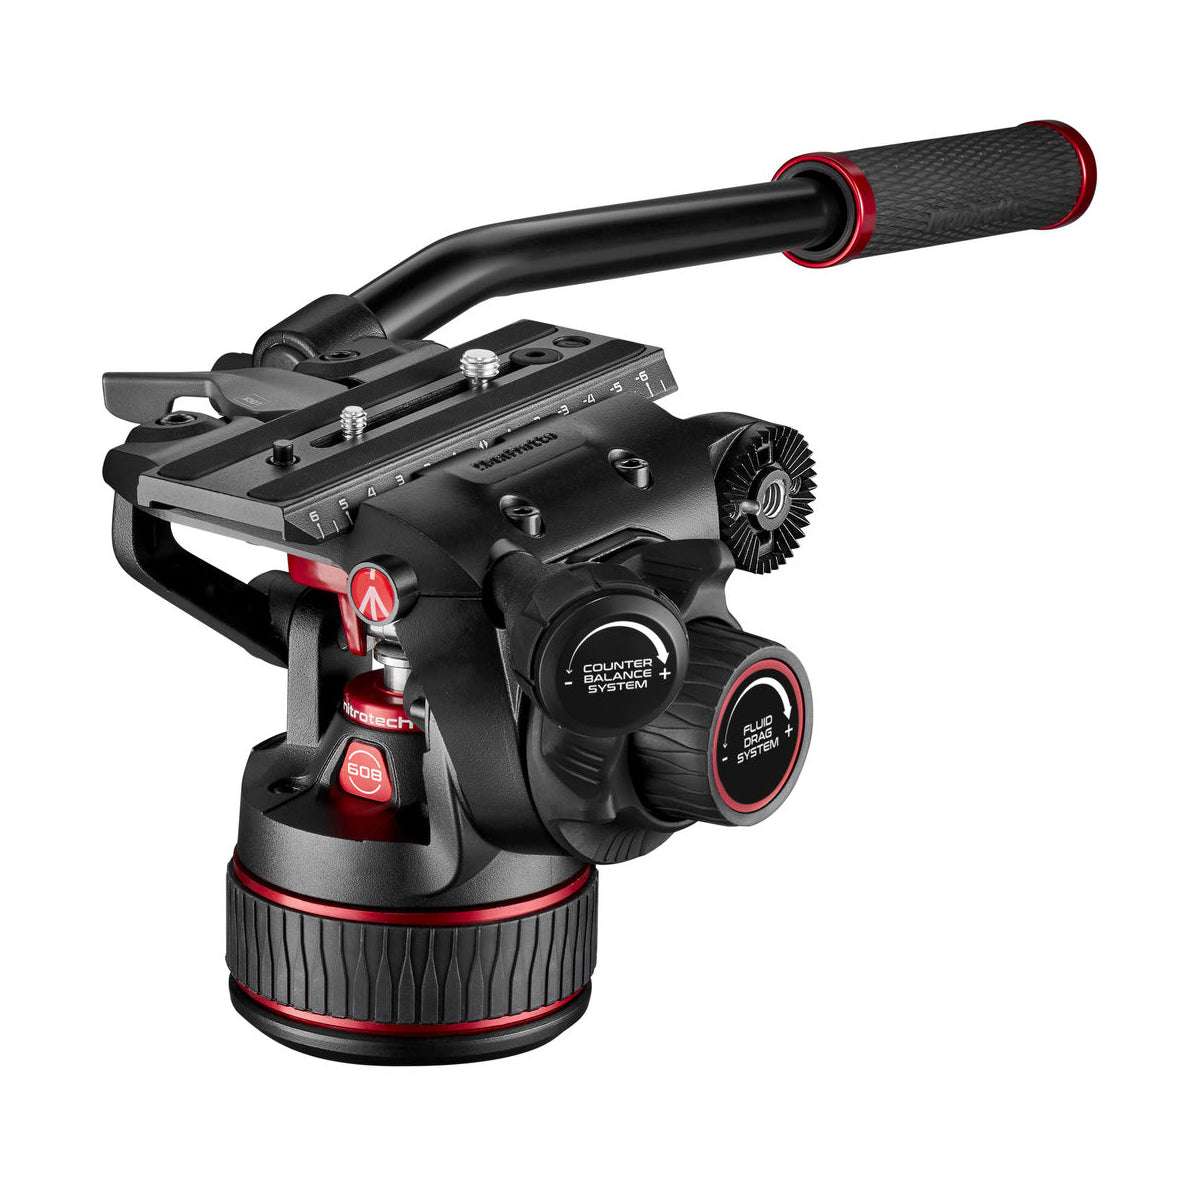 Manfrotto MVK608TWINFAUS Kit with Nitrotech 608 Fluid Head and 645 Fast Twin Leg Aluminum Tripod & Bag